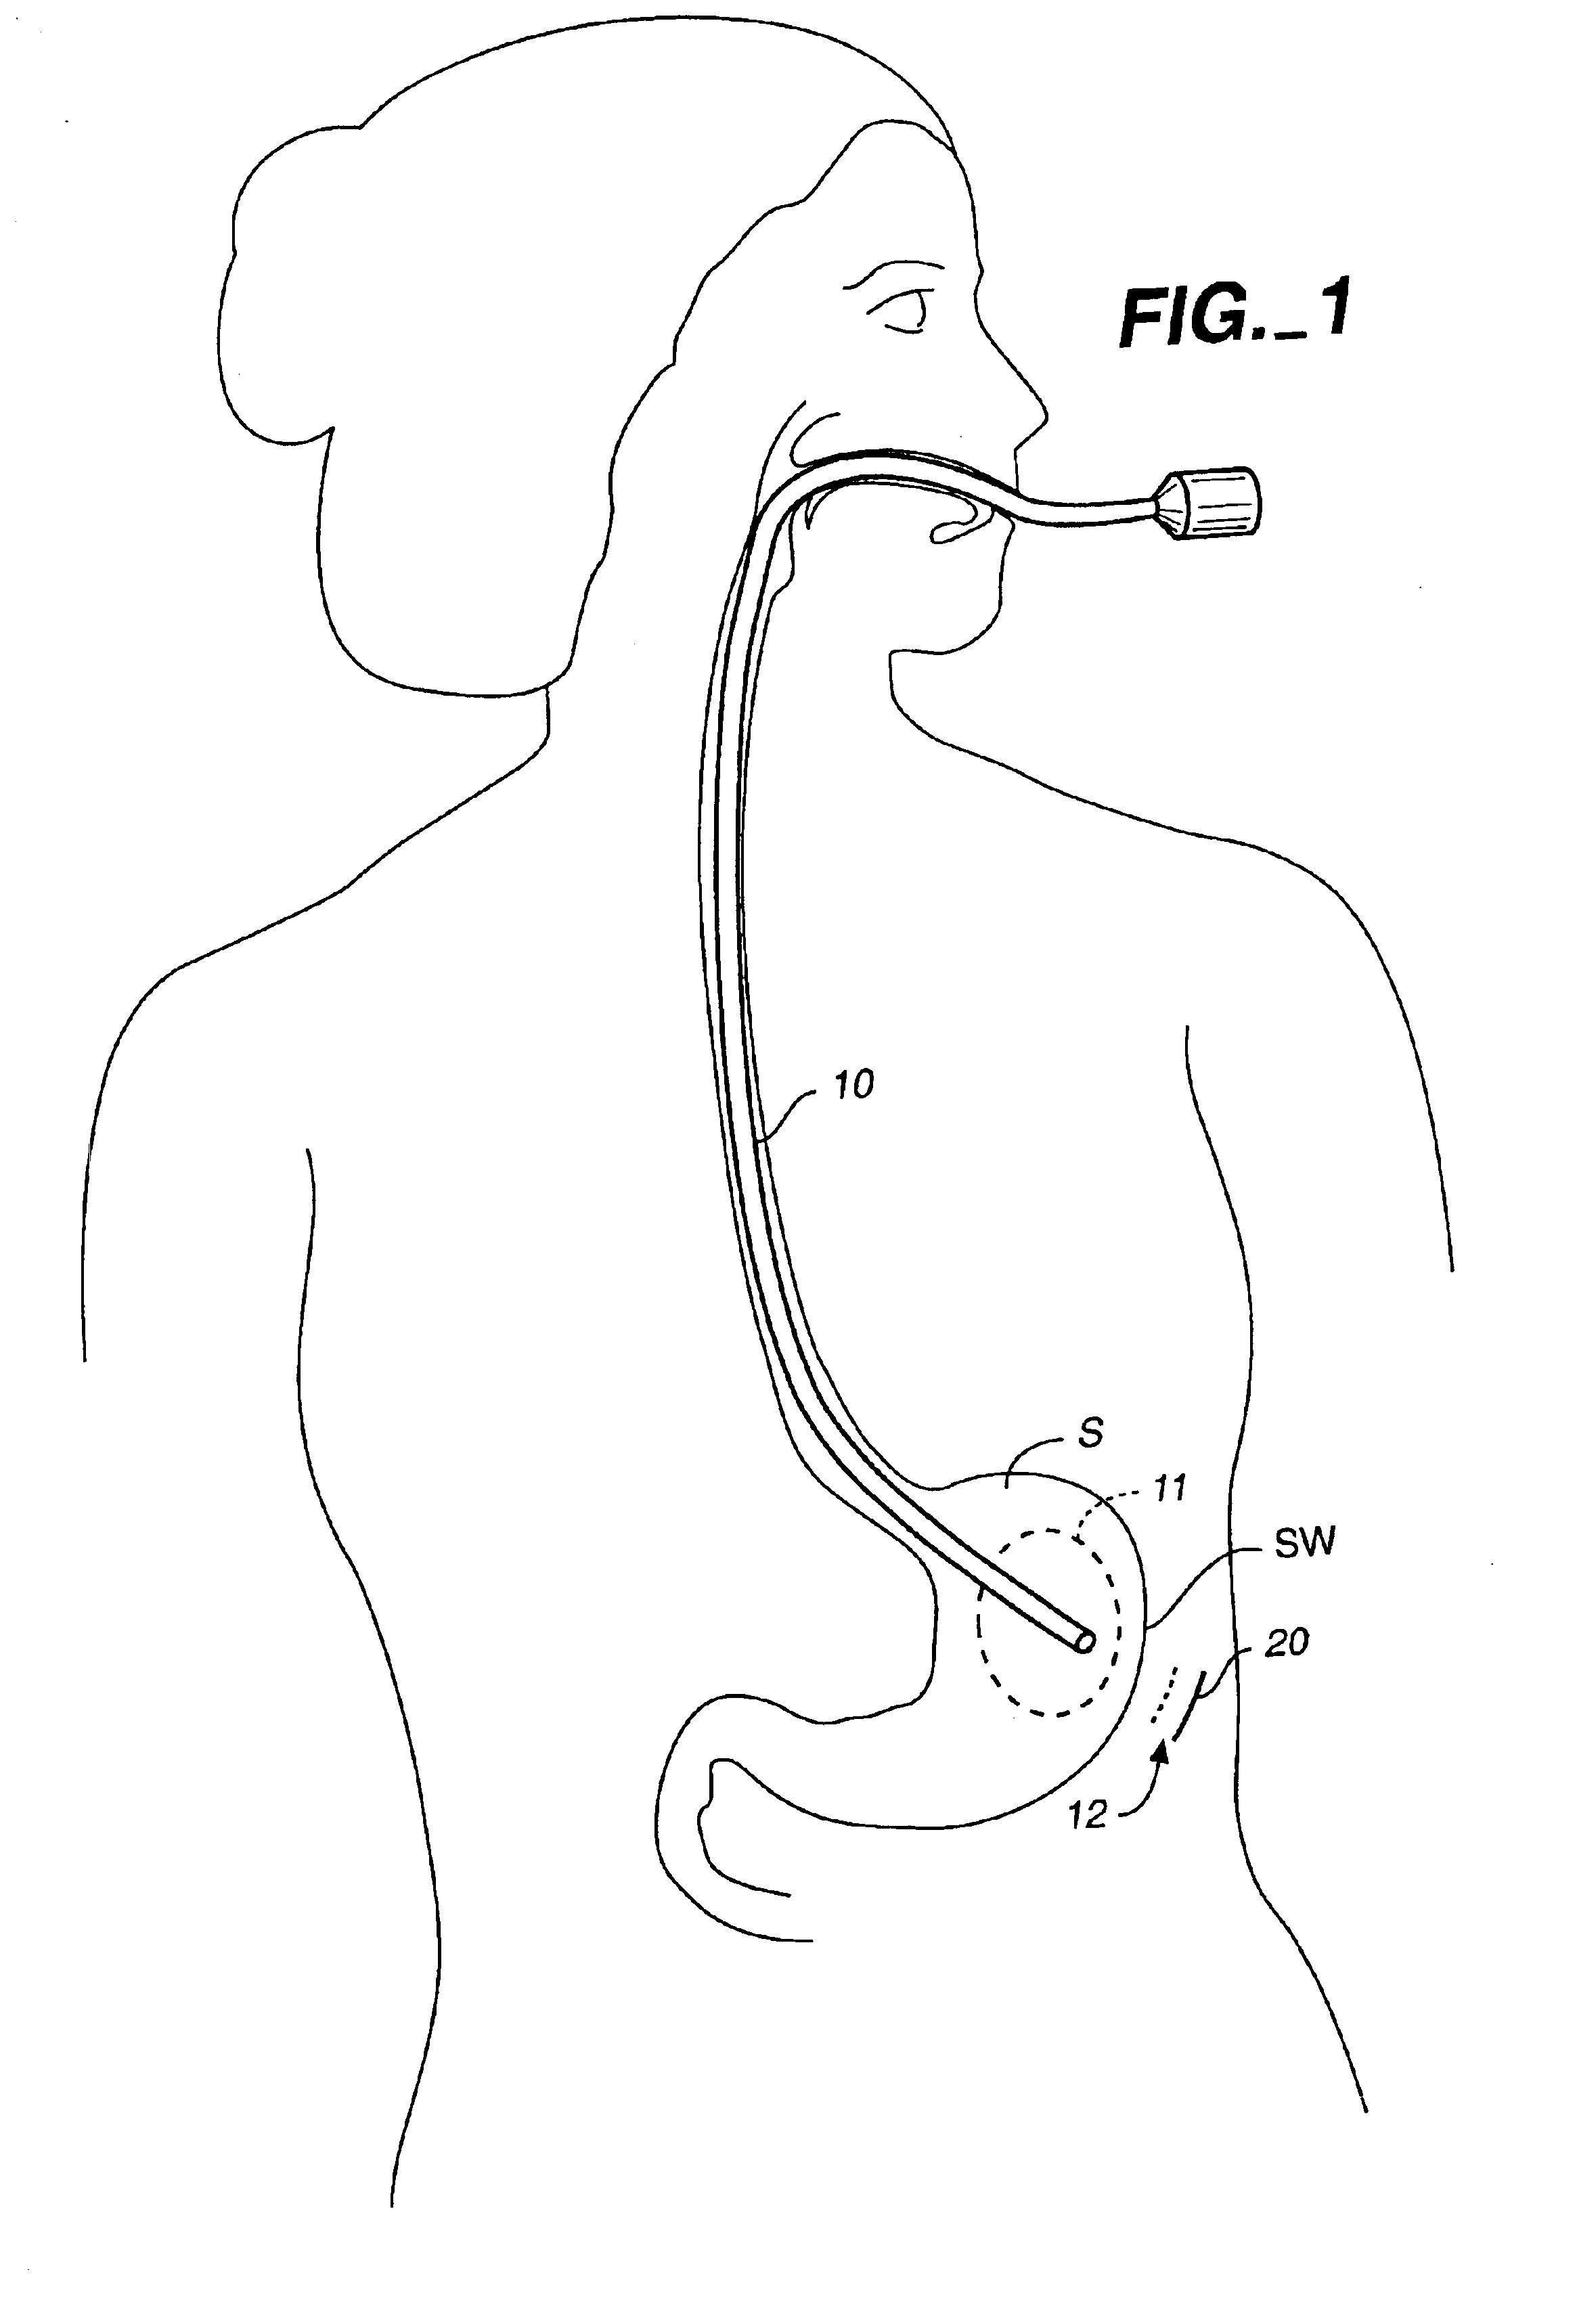 Method and device for use in minimally invasive placement of space-occupying intragastric devices